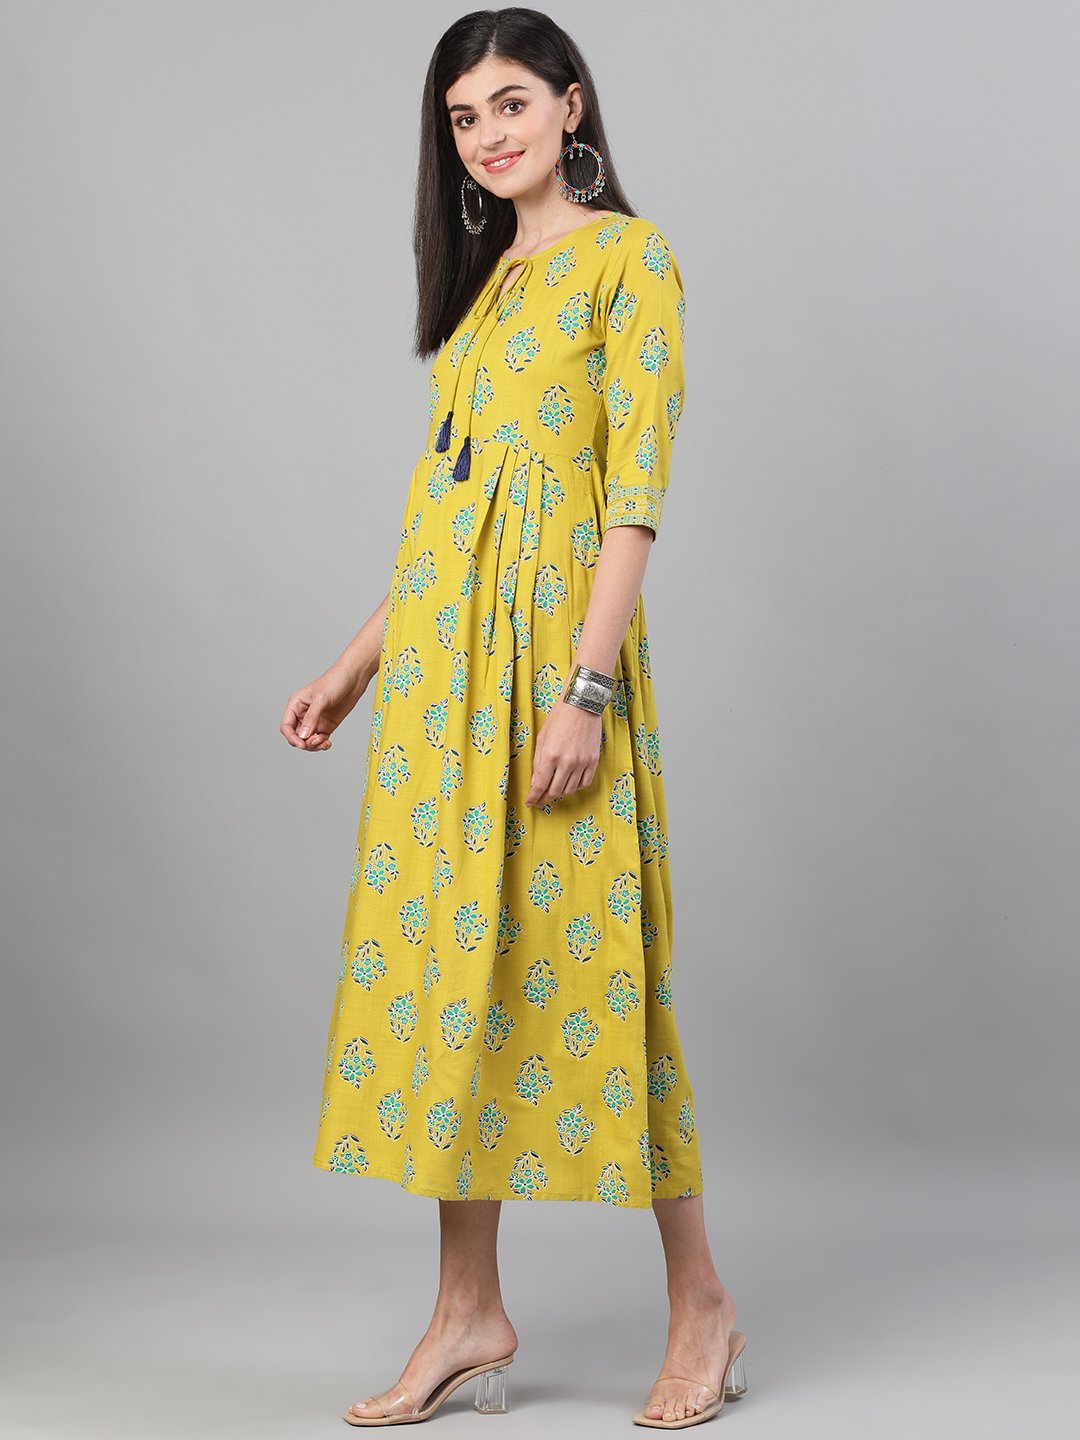 Women's Green Printed Round Neck Viscose Rayon Fit And Flare Dress With Pockets - Nayo Clothing